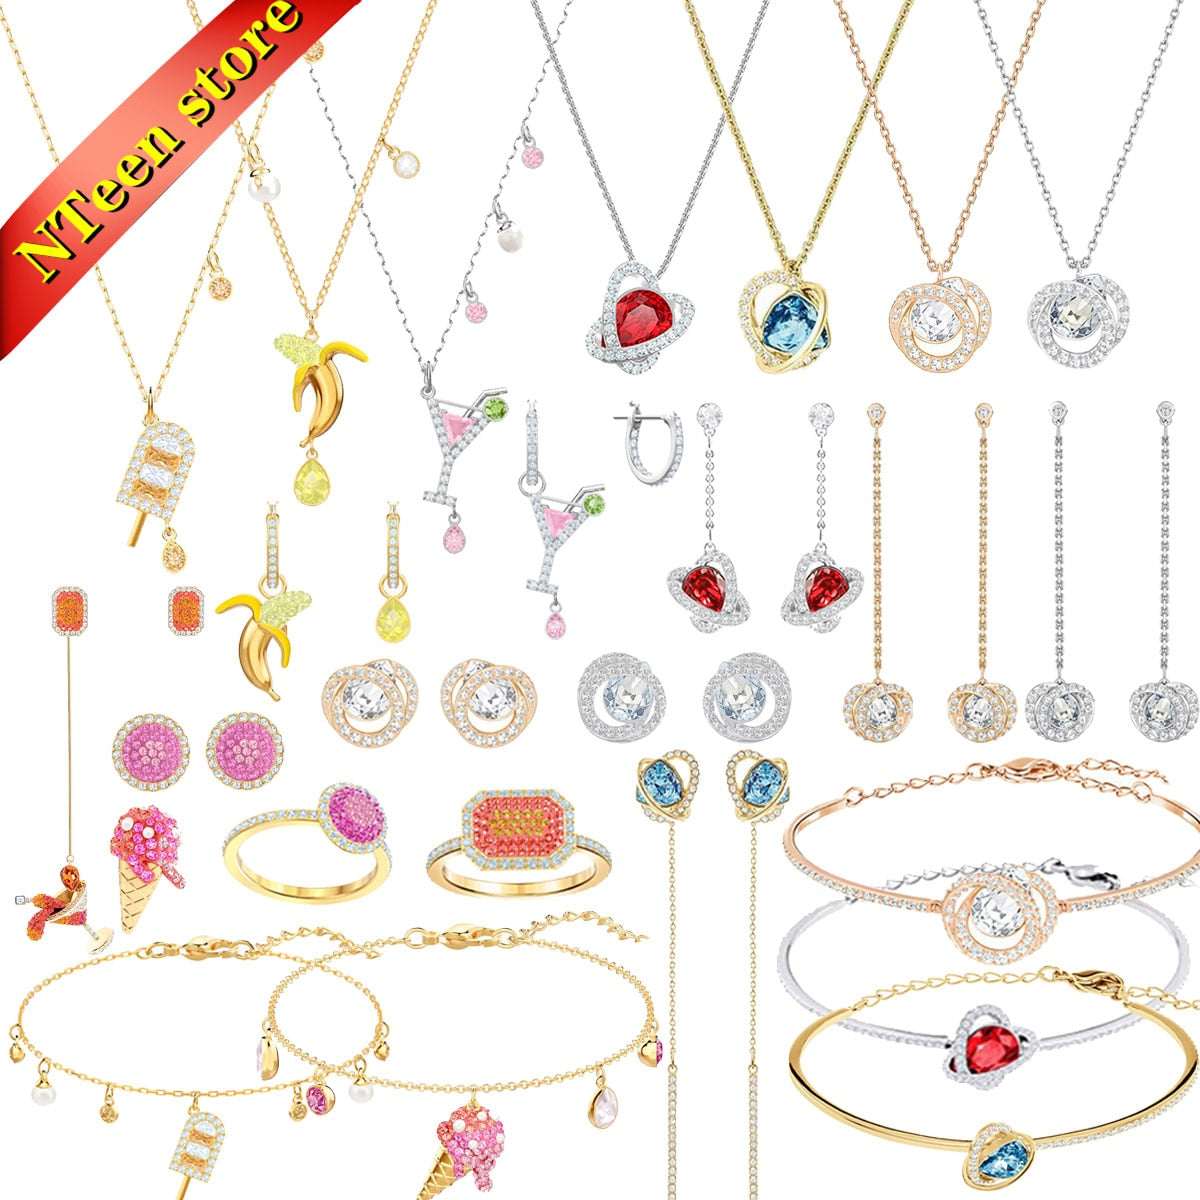 Swa Fine Fashion Ladies Jewelry Sets Charm Exquisite Cocktail Party Party Ice Cream Banana Jewelry Set Romantic Gifts for Women